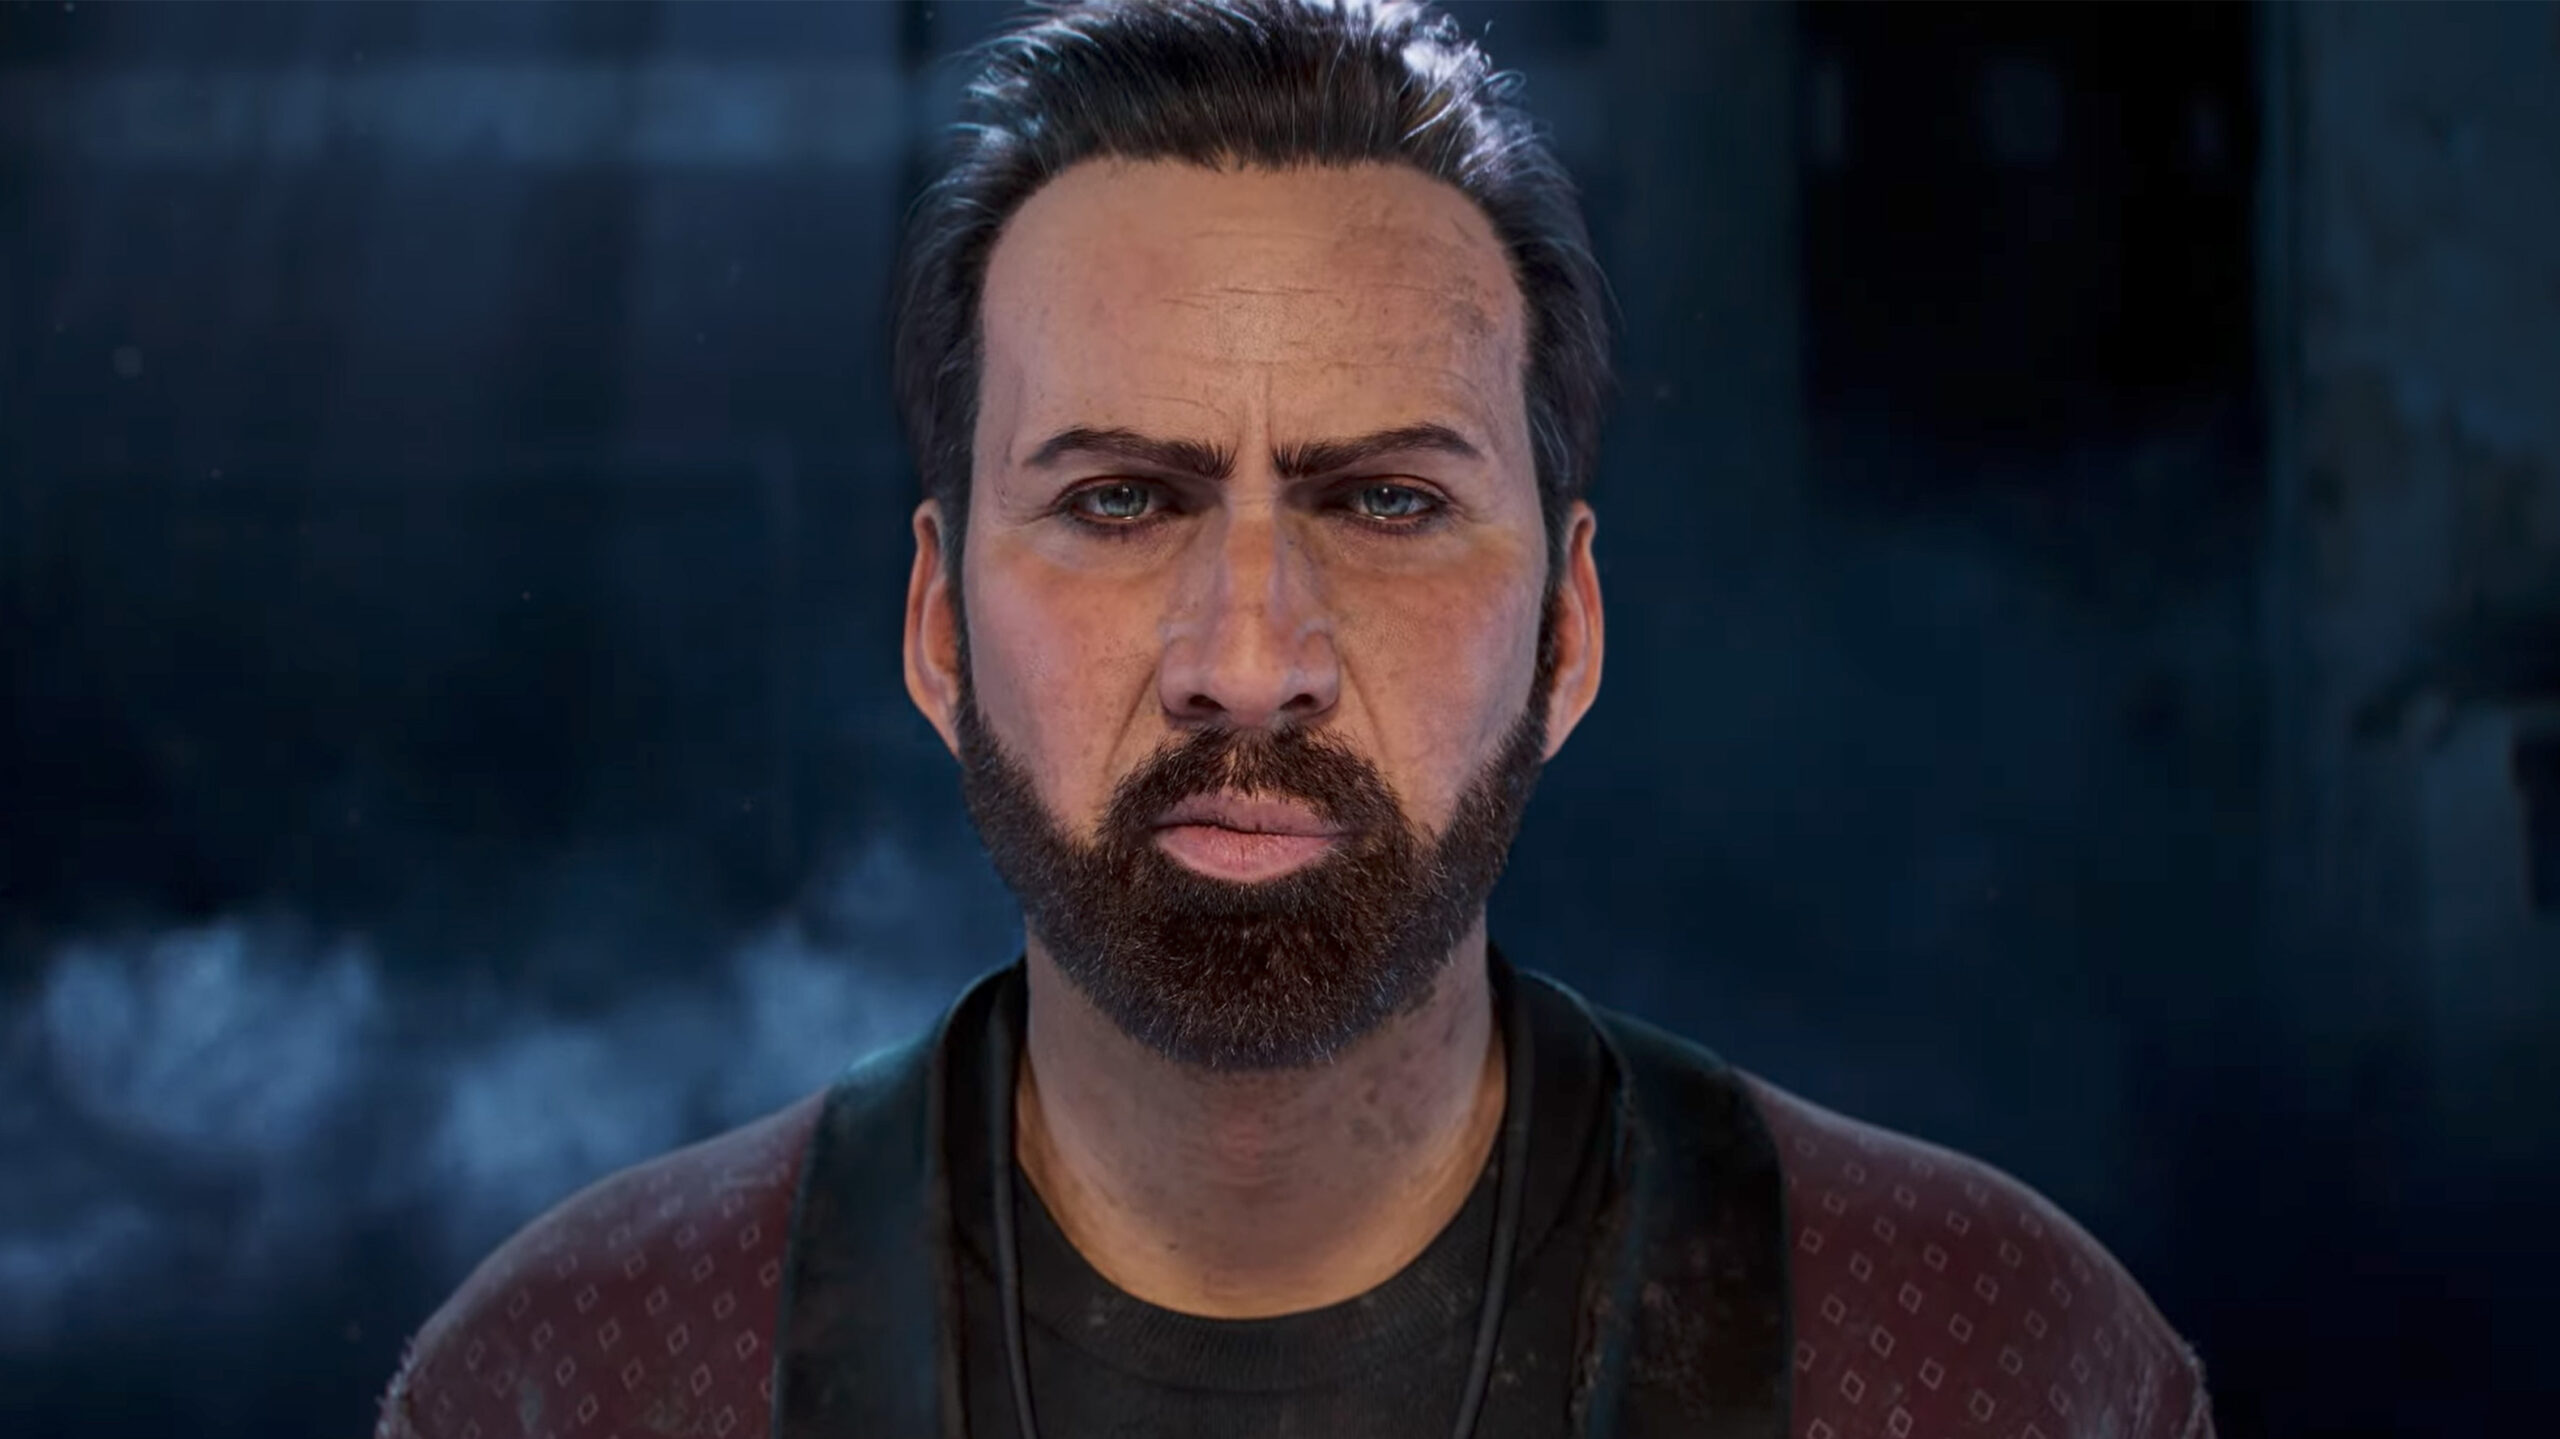 Nicolas Cage in Dead by Daylight